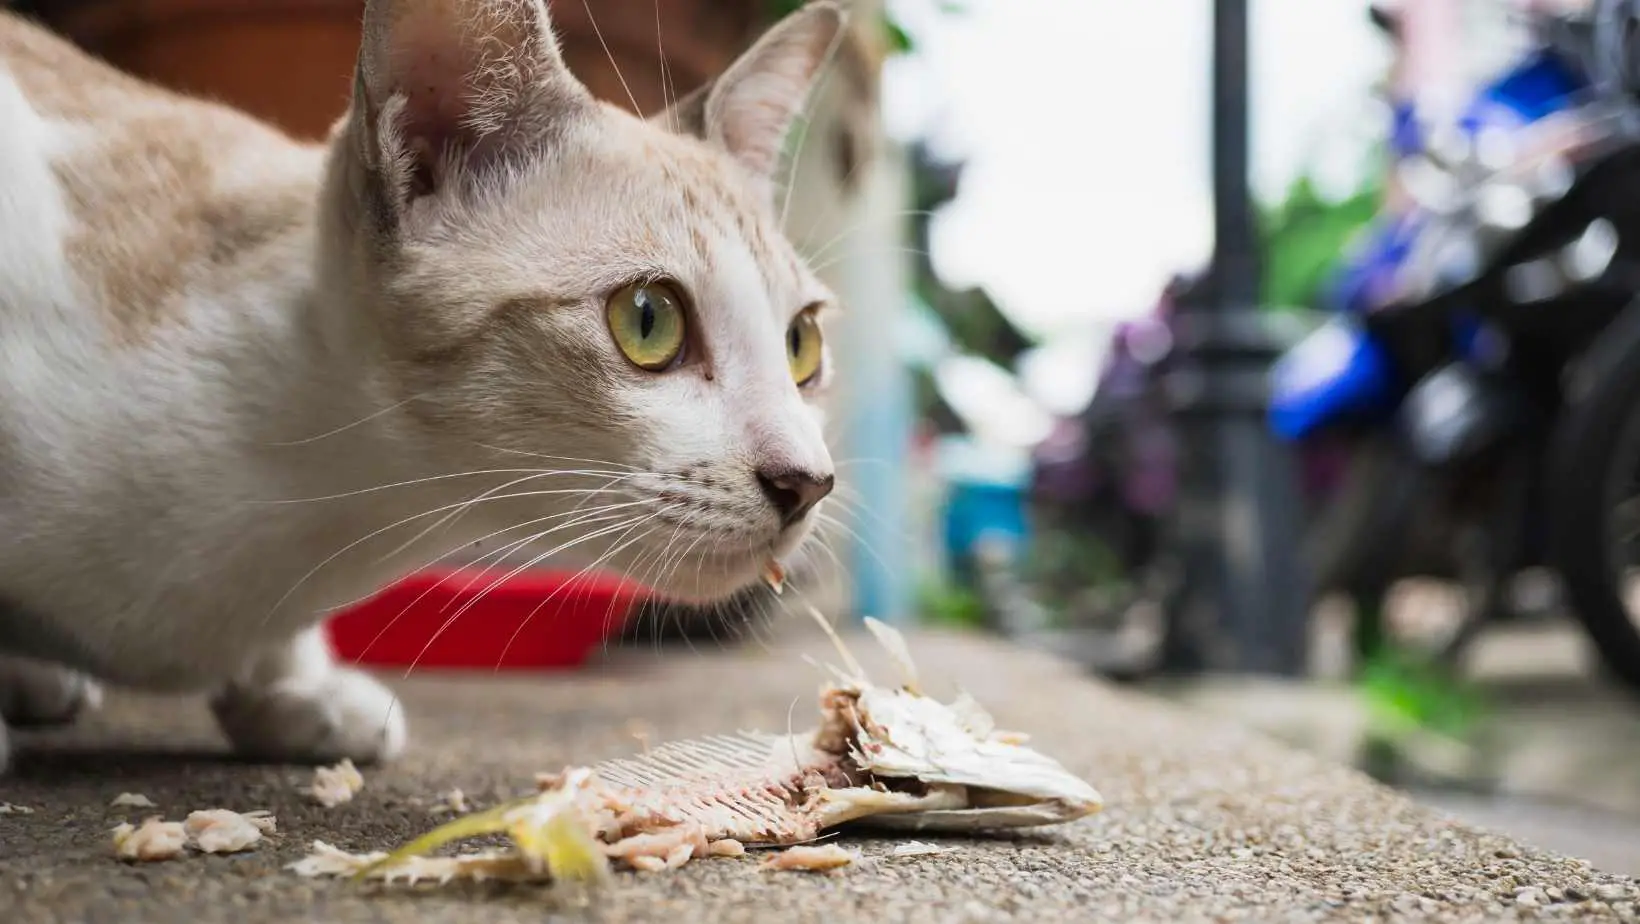 What can cats eat besides cat food?